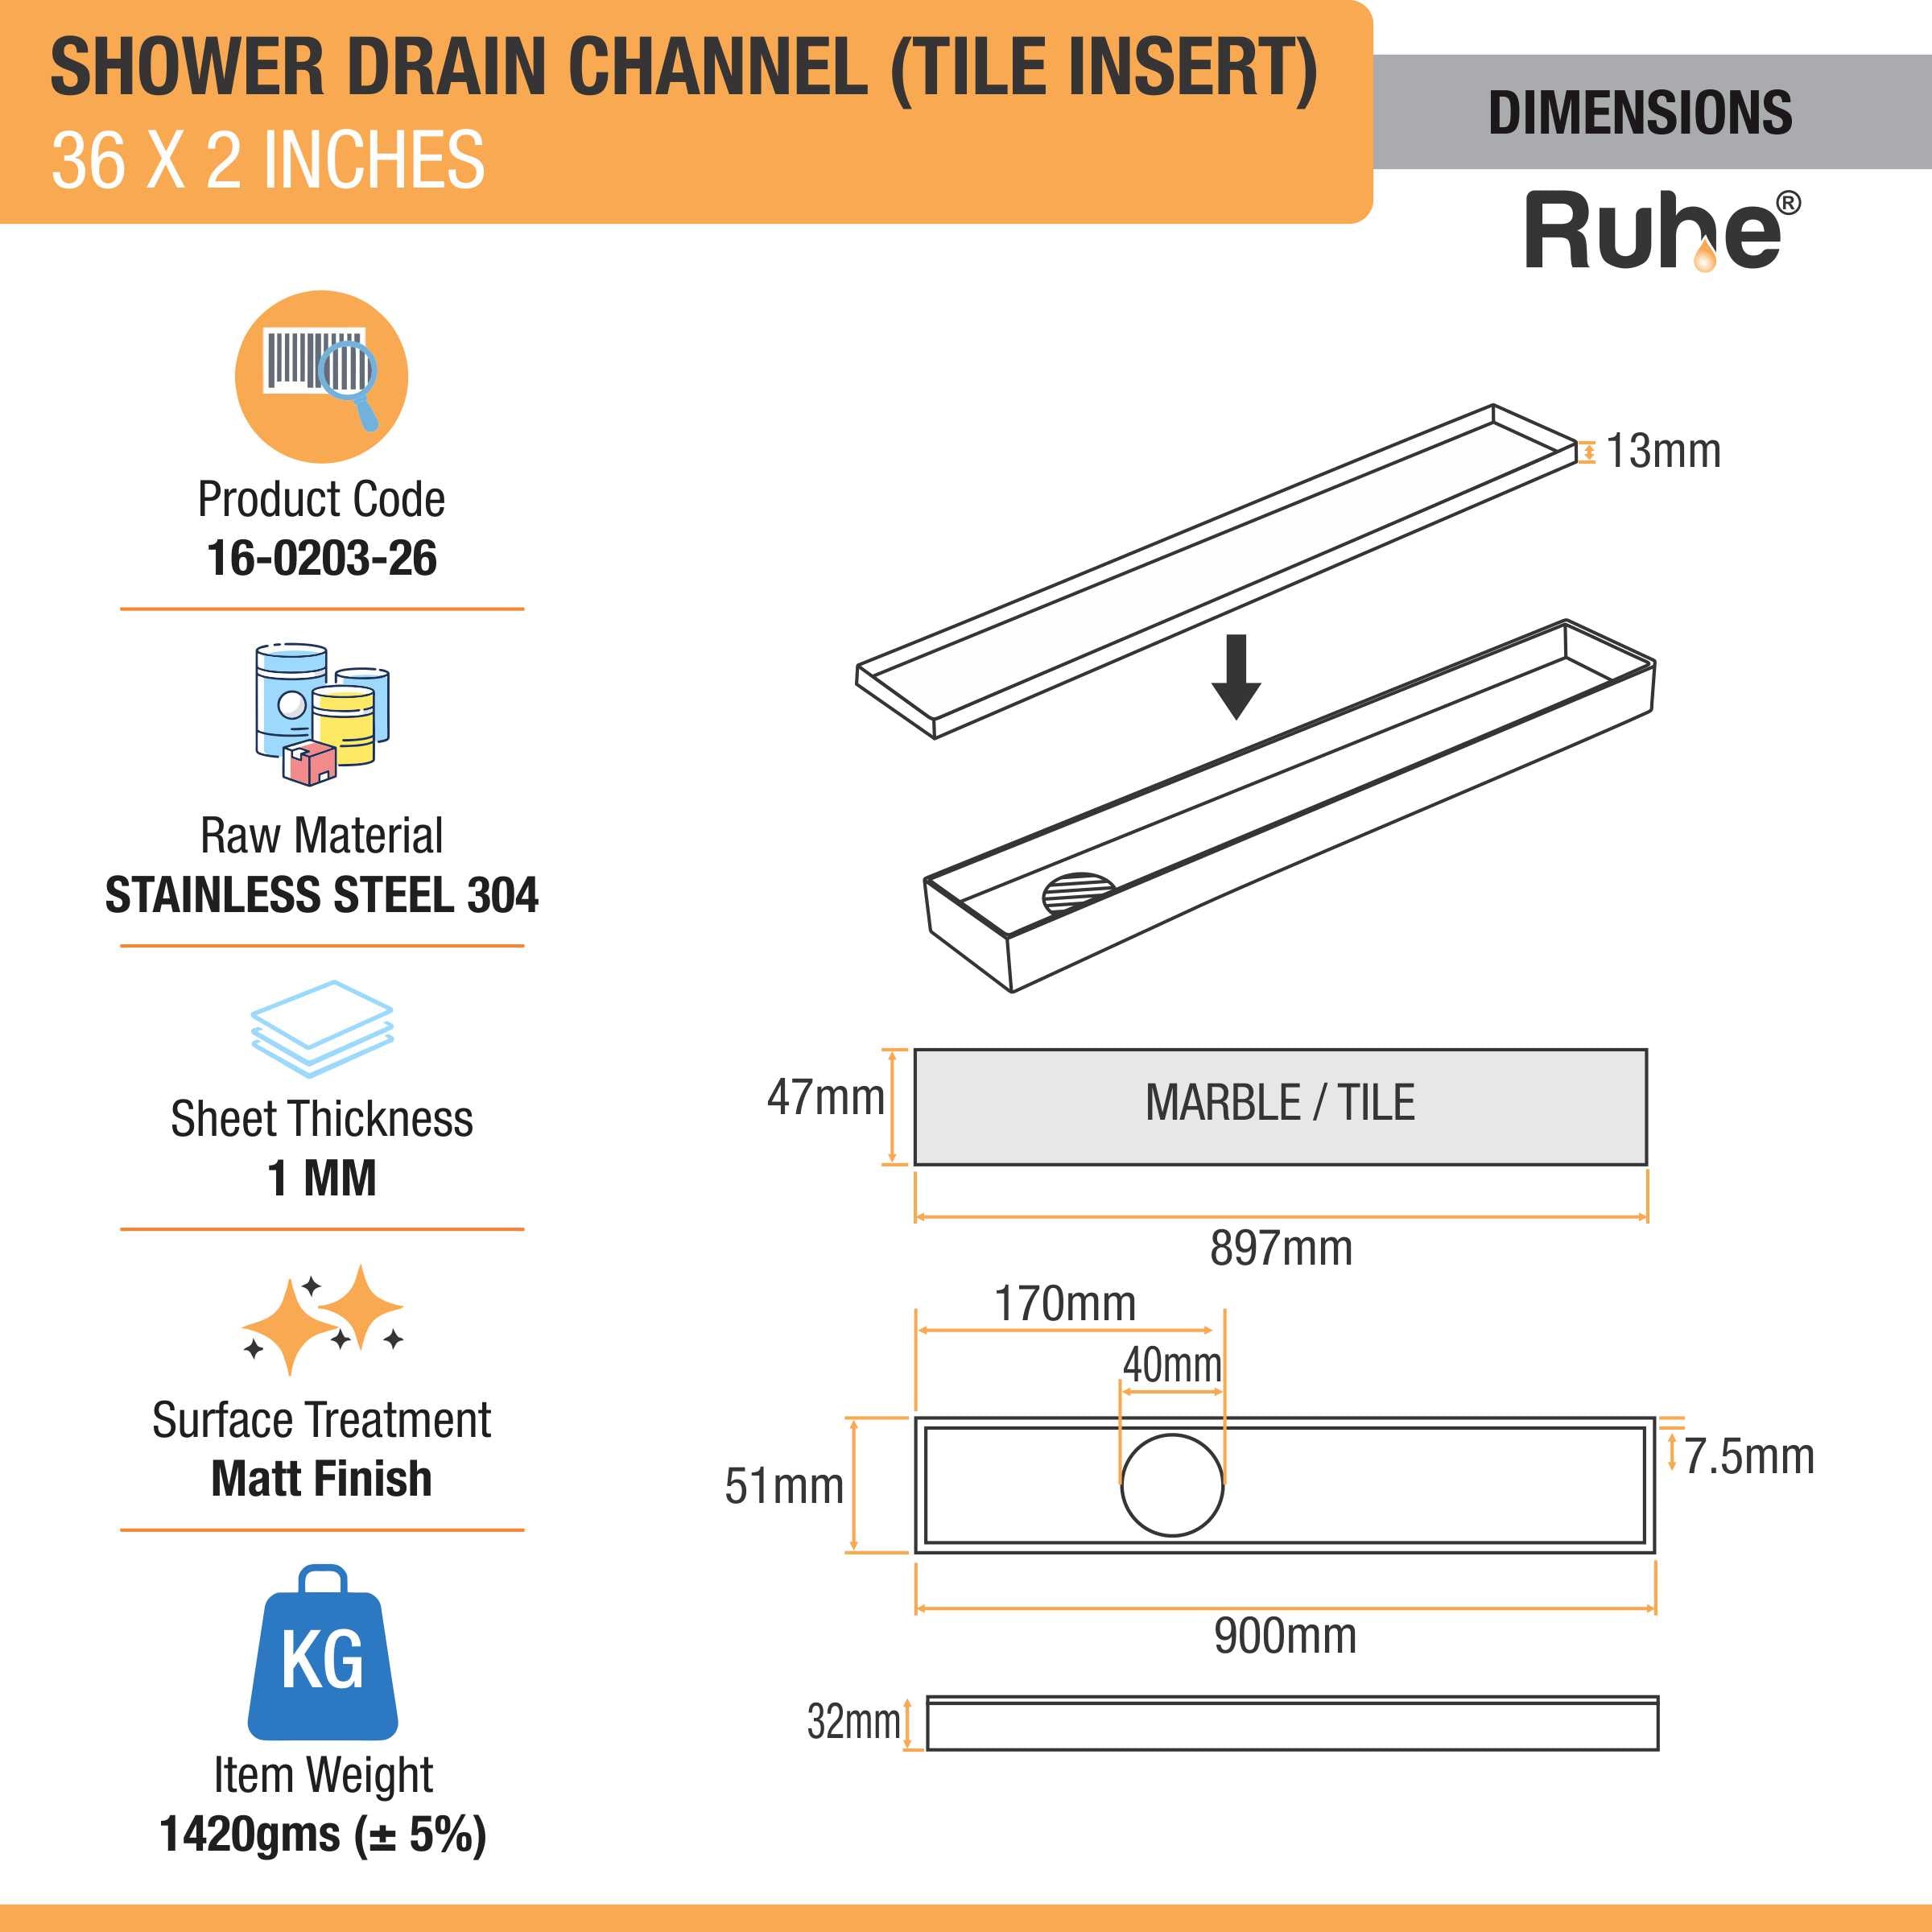 Tile Insert Shower Drain Channel (36 x 2 Inches) (304 Grade) dimensions and size